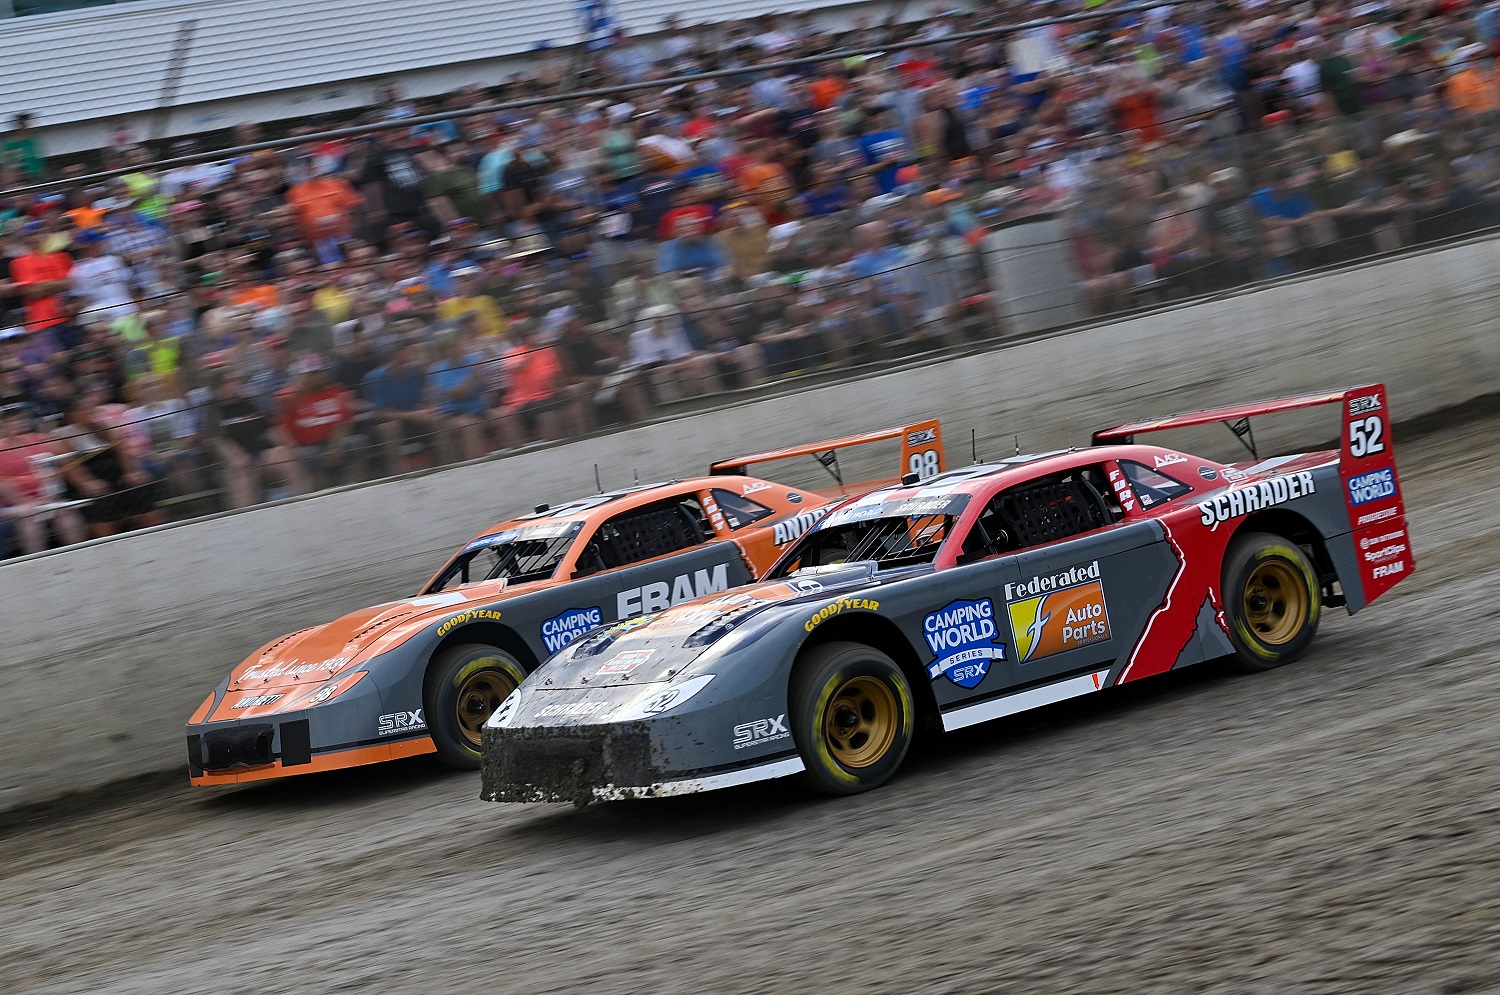 Ken Schrader, driver of No. 52, and Marco Andretti, driver of No. 98, compete in a heat race at a Camping World Superstar Racing Experience at I-55 Raceway on July 16, 2022 in Pevely, Missouri.